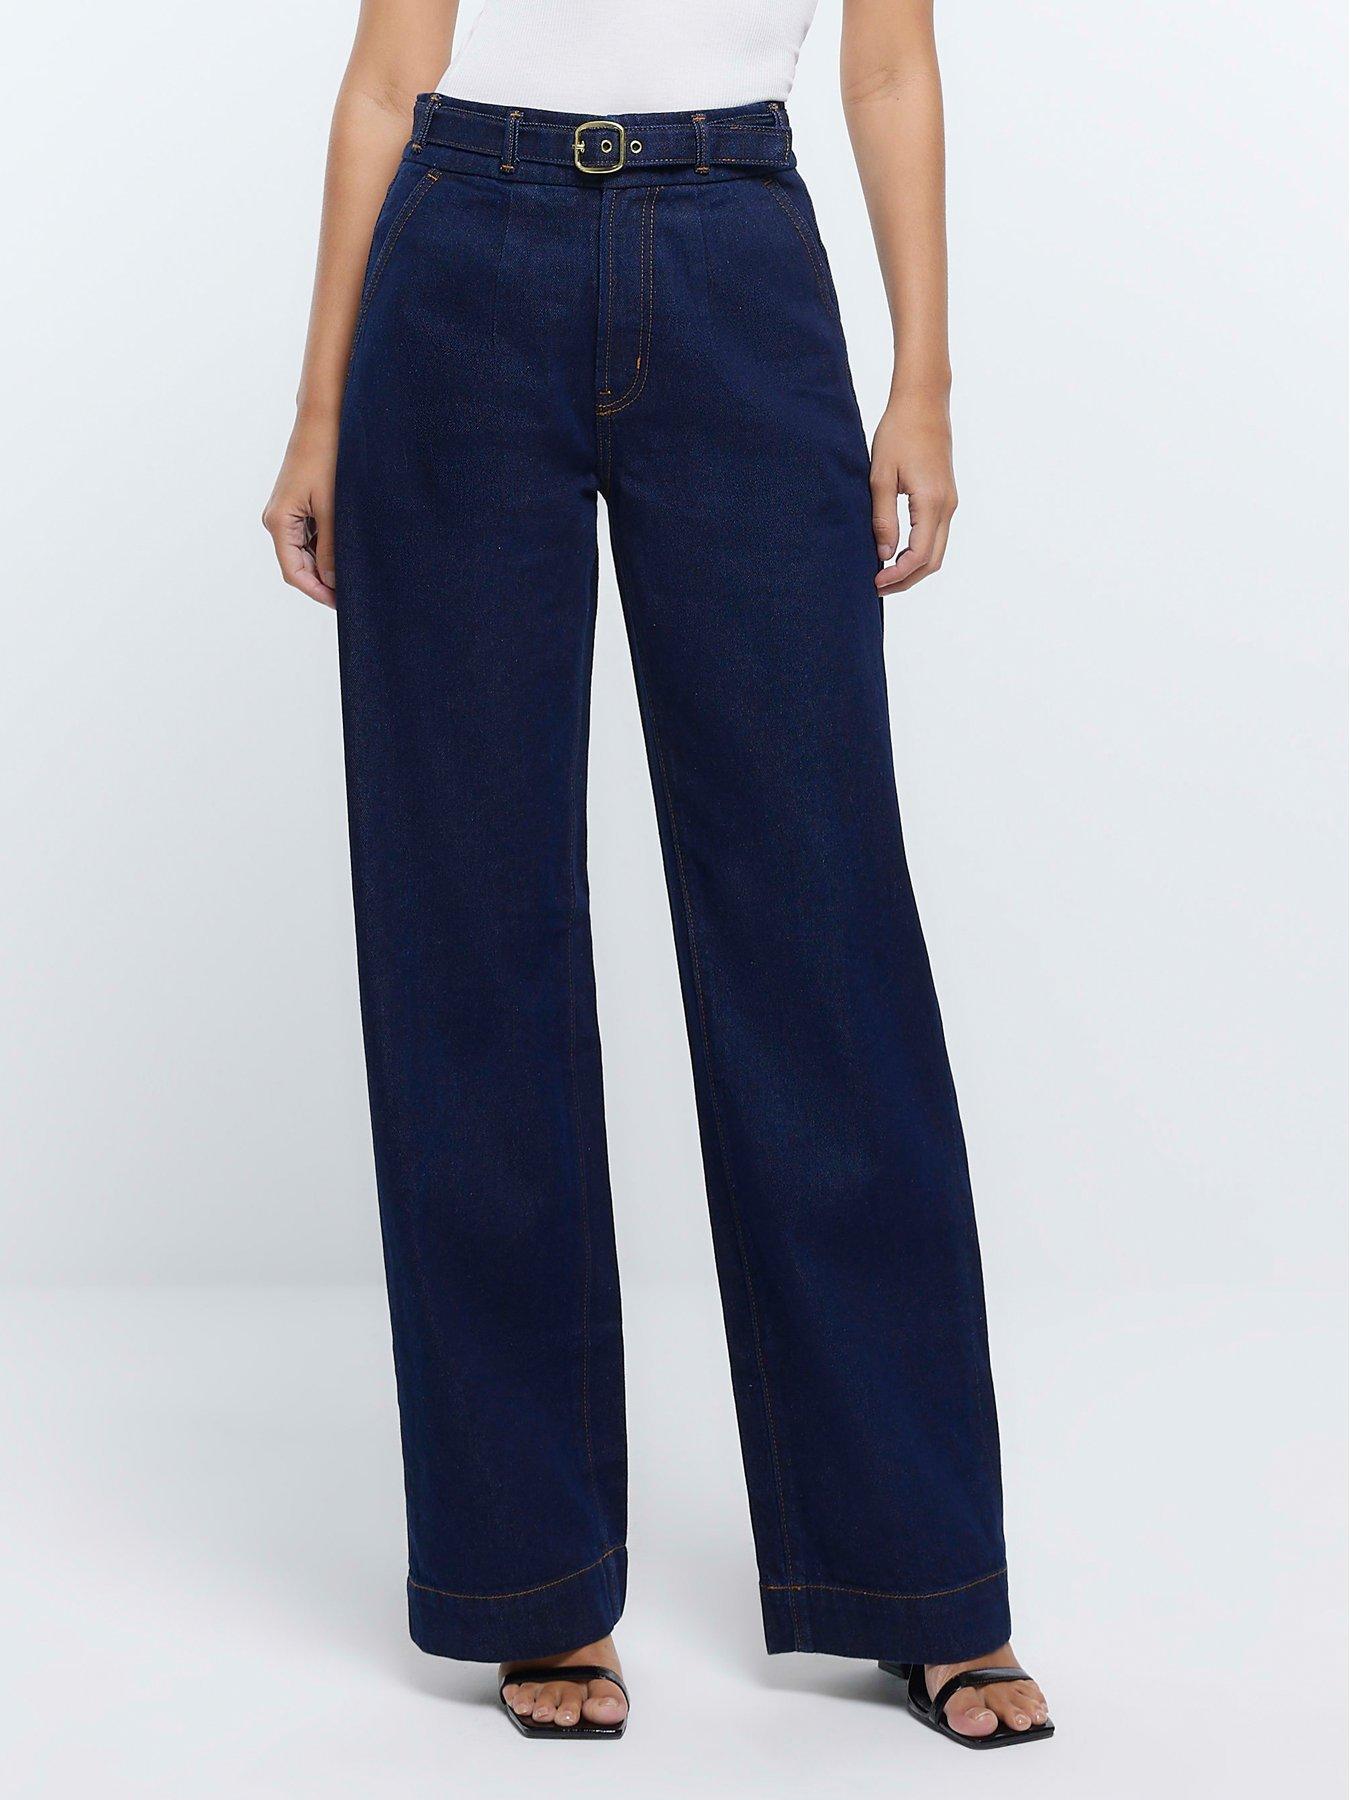 High-Waisted Wow Wide-Leg Jeans For Women Old Navy, 41% OFF